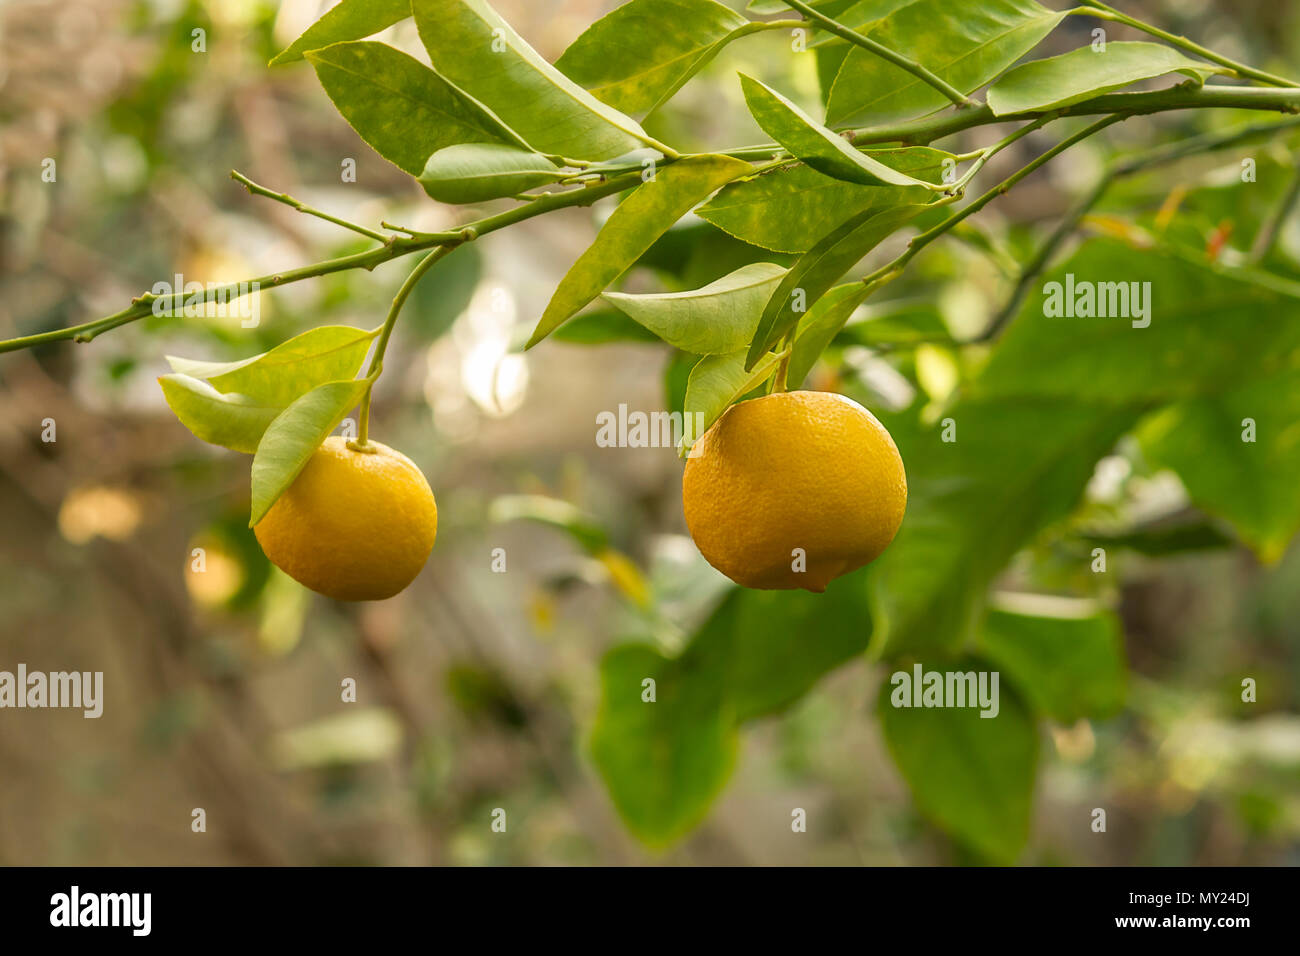 Organic yellow lemon fruits on the tree with green leaves. Stock Photo